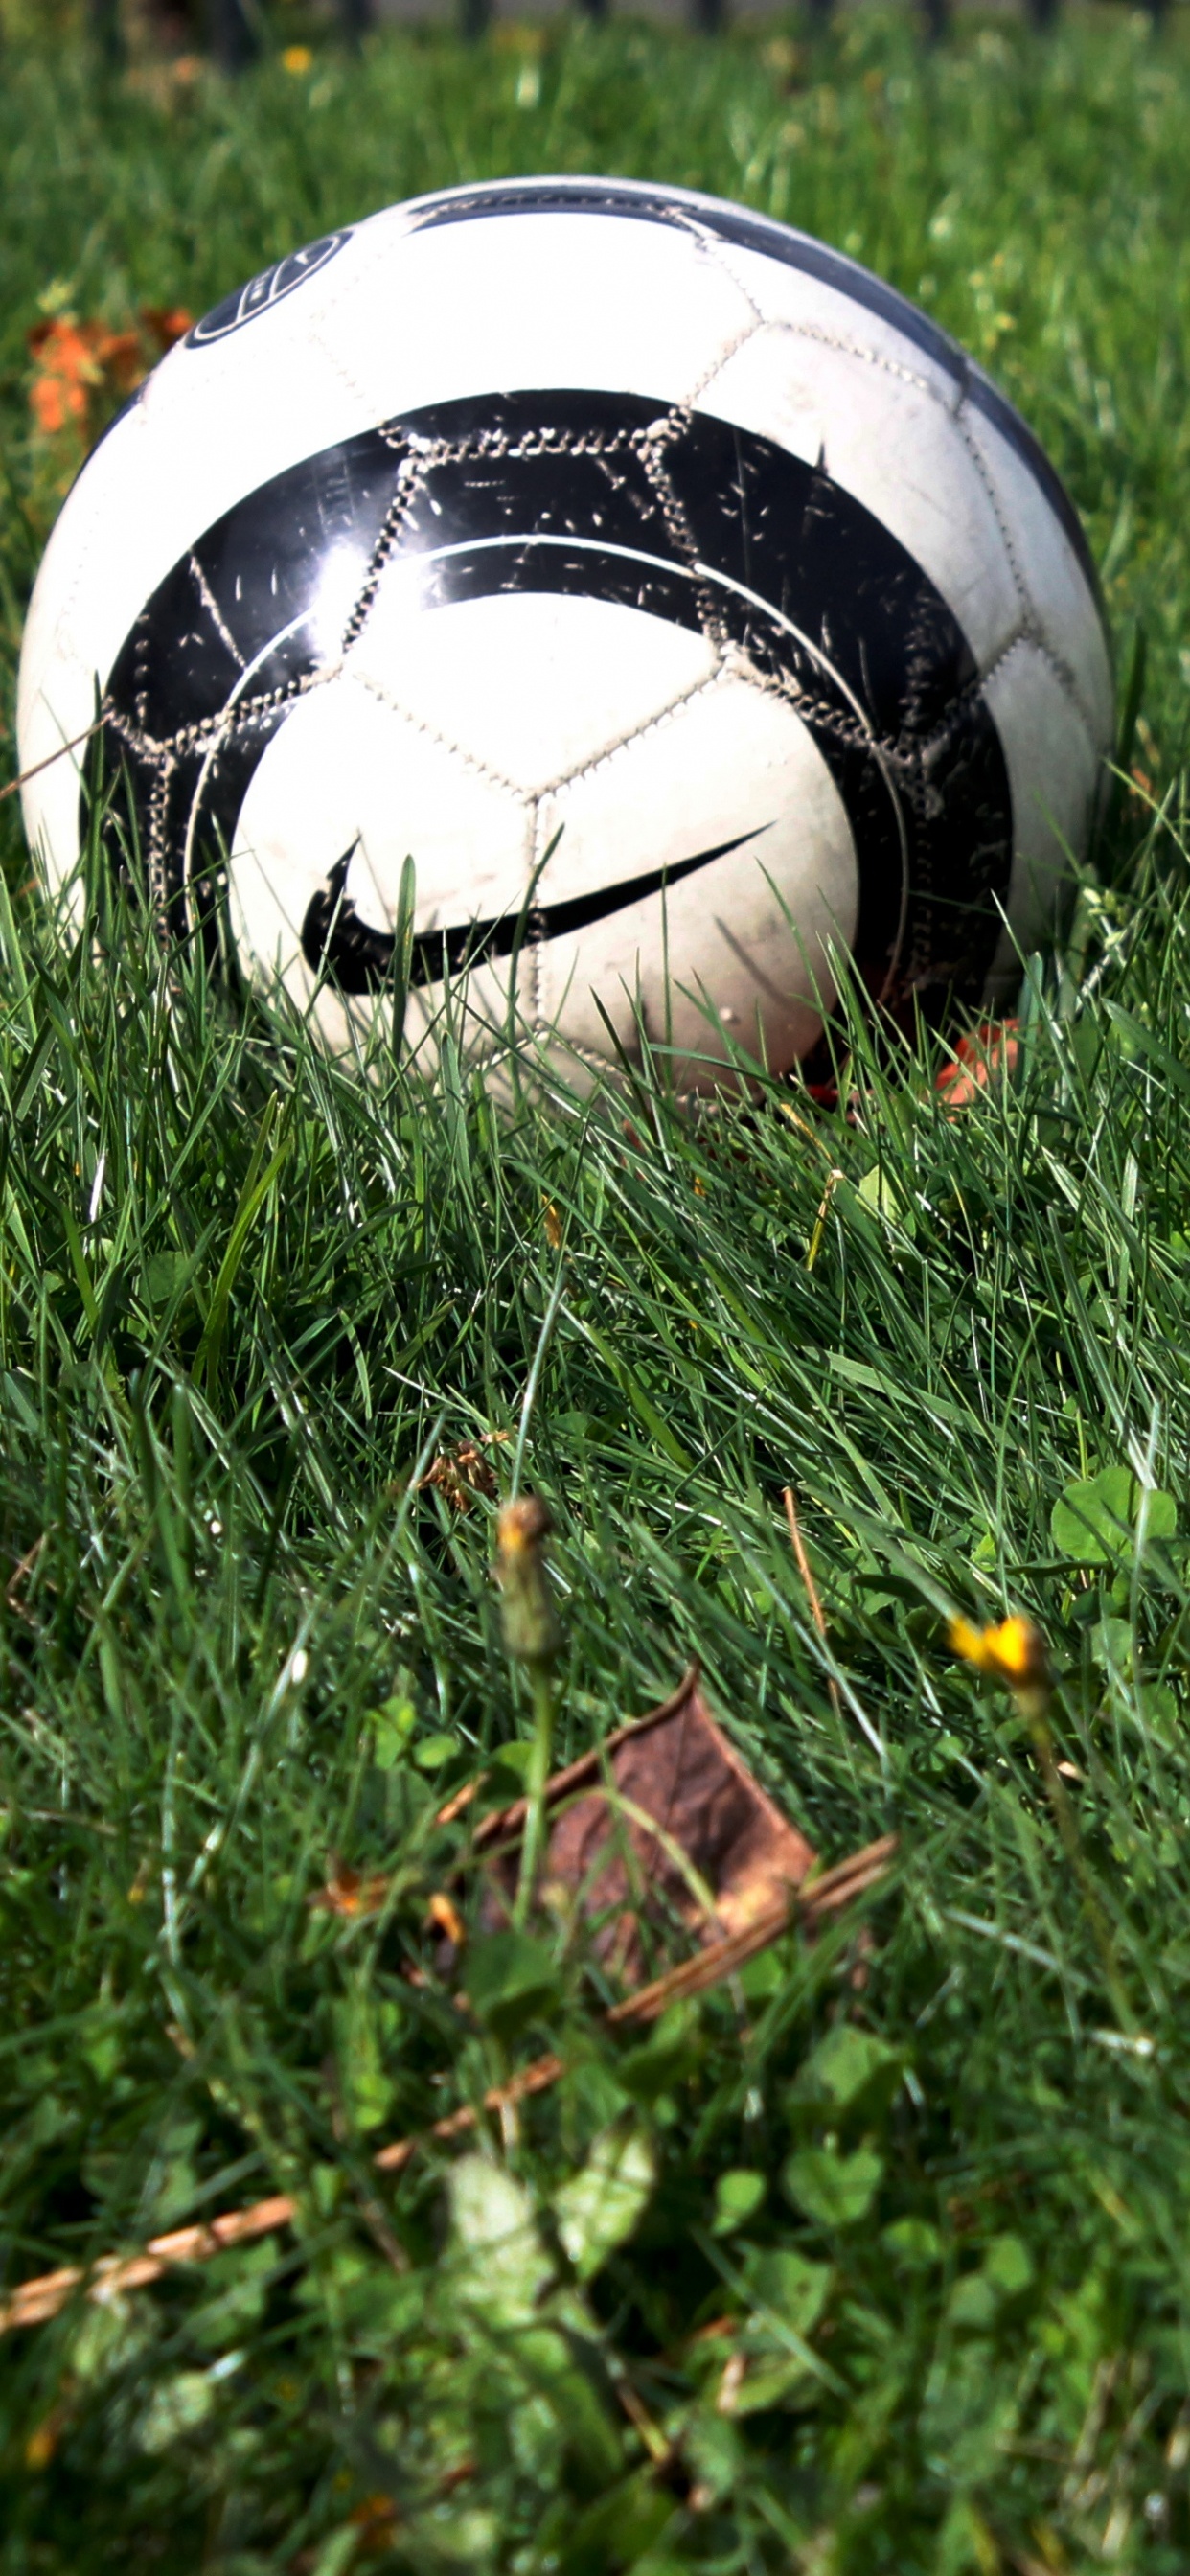 White and Black Soccer Ball on Green Grass Field. Wallpaper in 1242x2688 Resolution